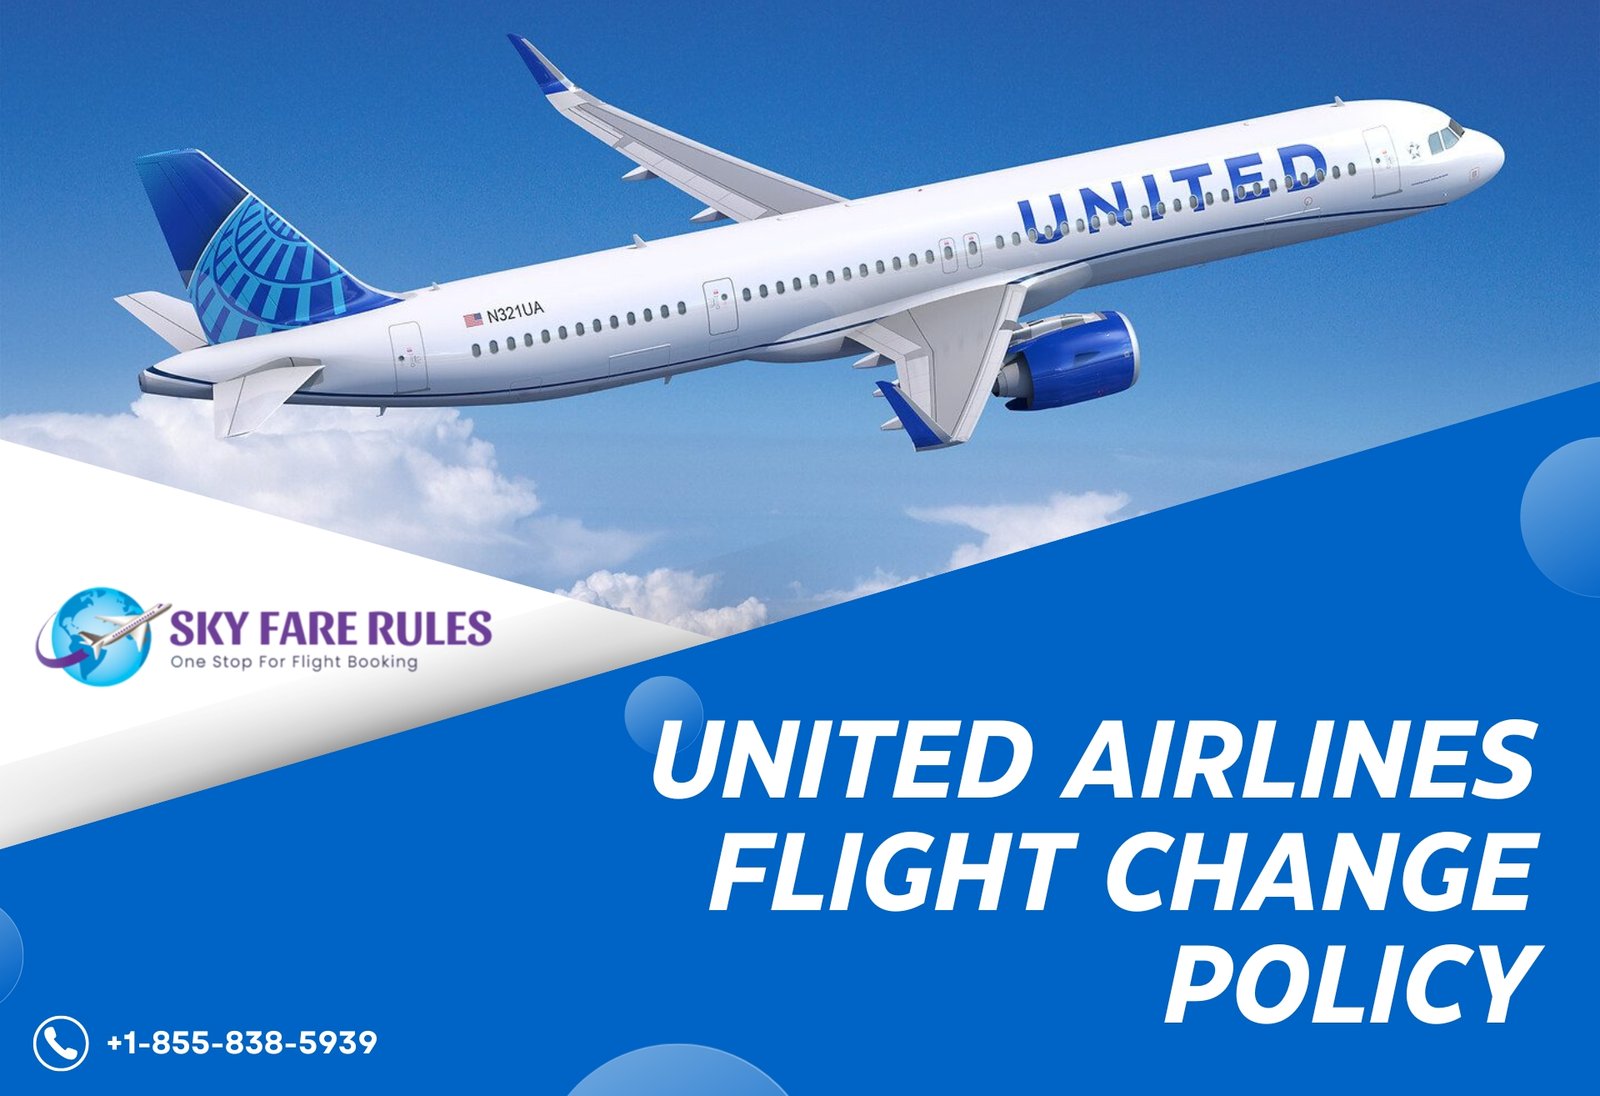 United Airlines Flight Change Policy - Sky Fare Rules